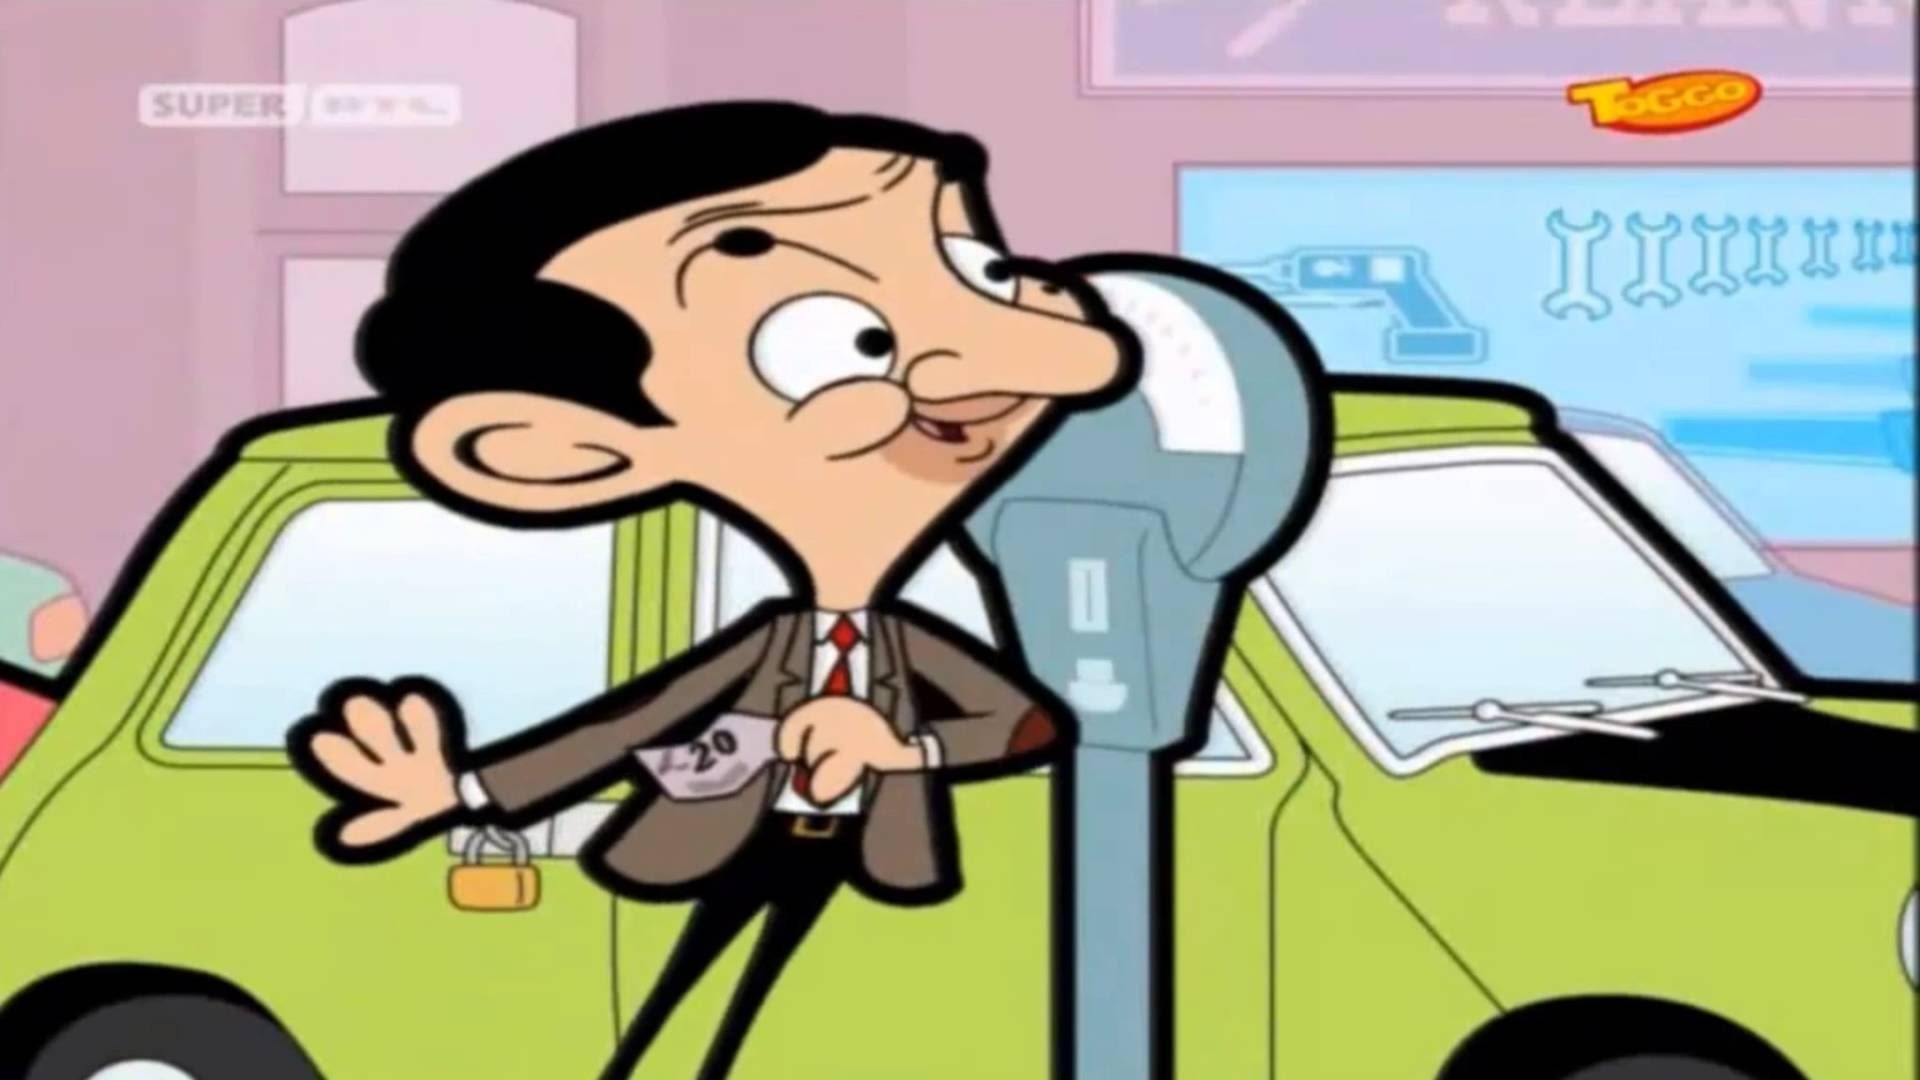 1920x1080 Mr Bean Animated Series Full Episodes - New Comedy Movies Mr Bean 2015 -  YouTube